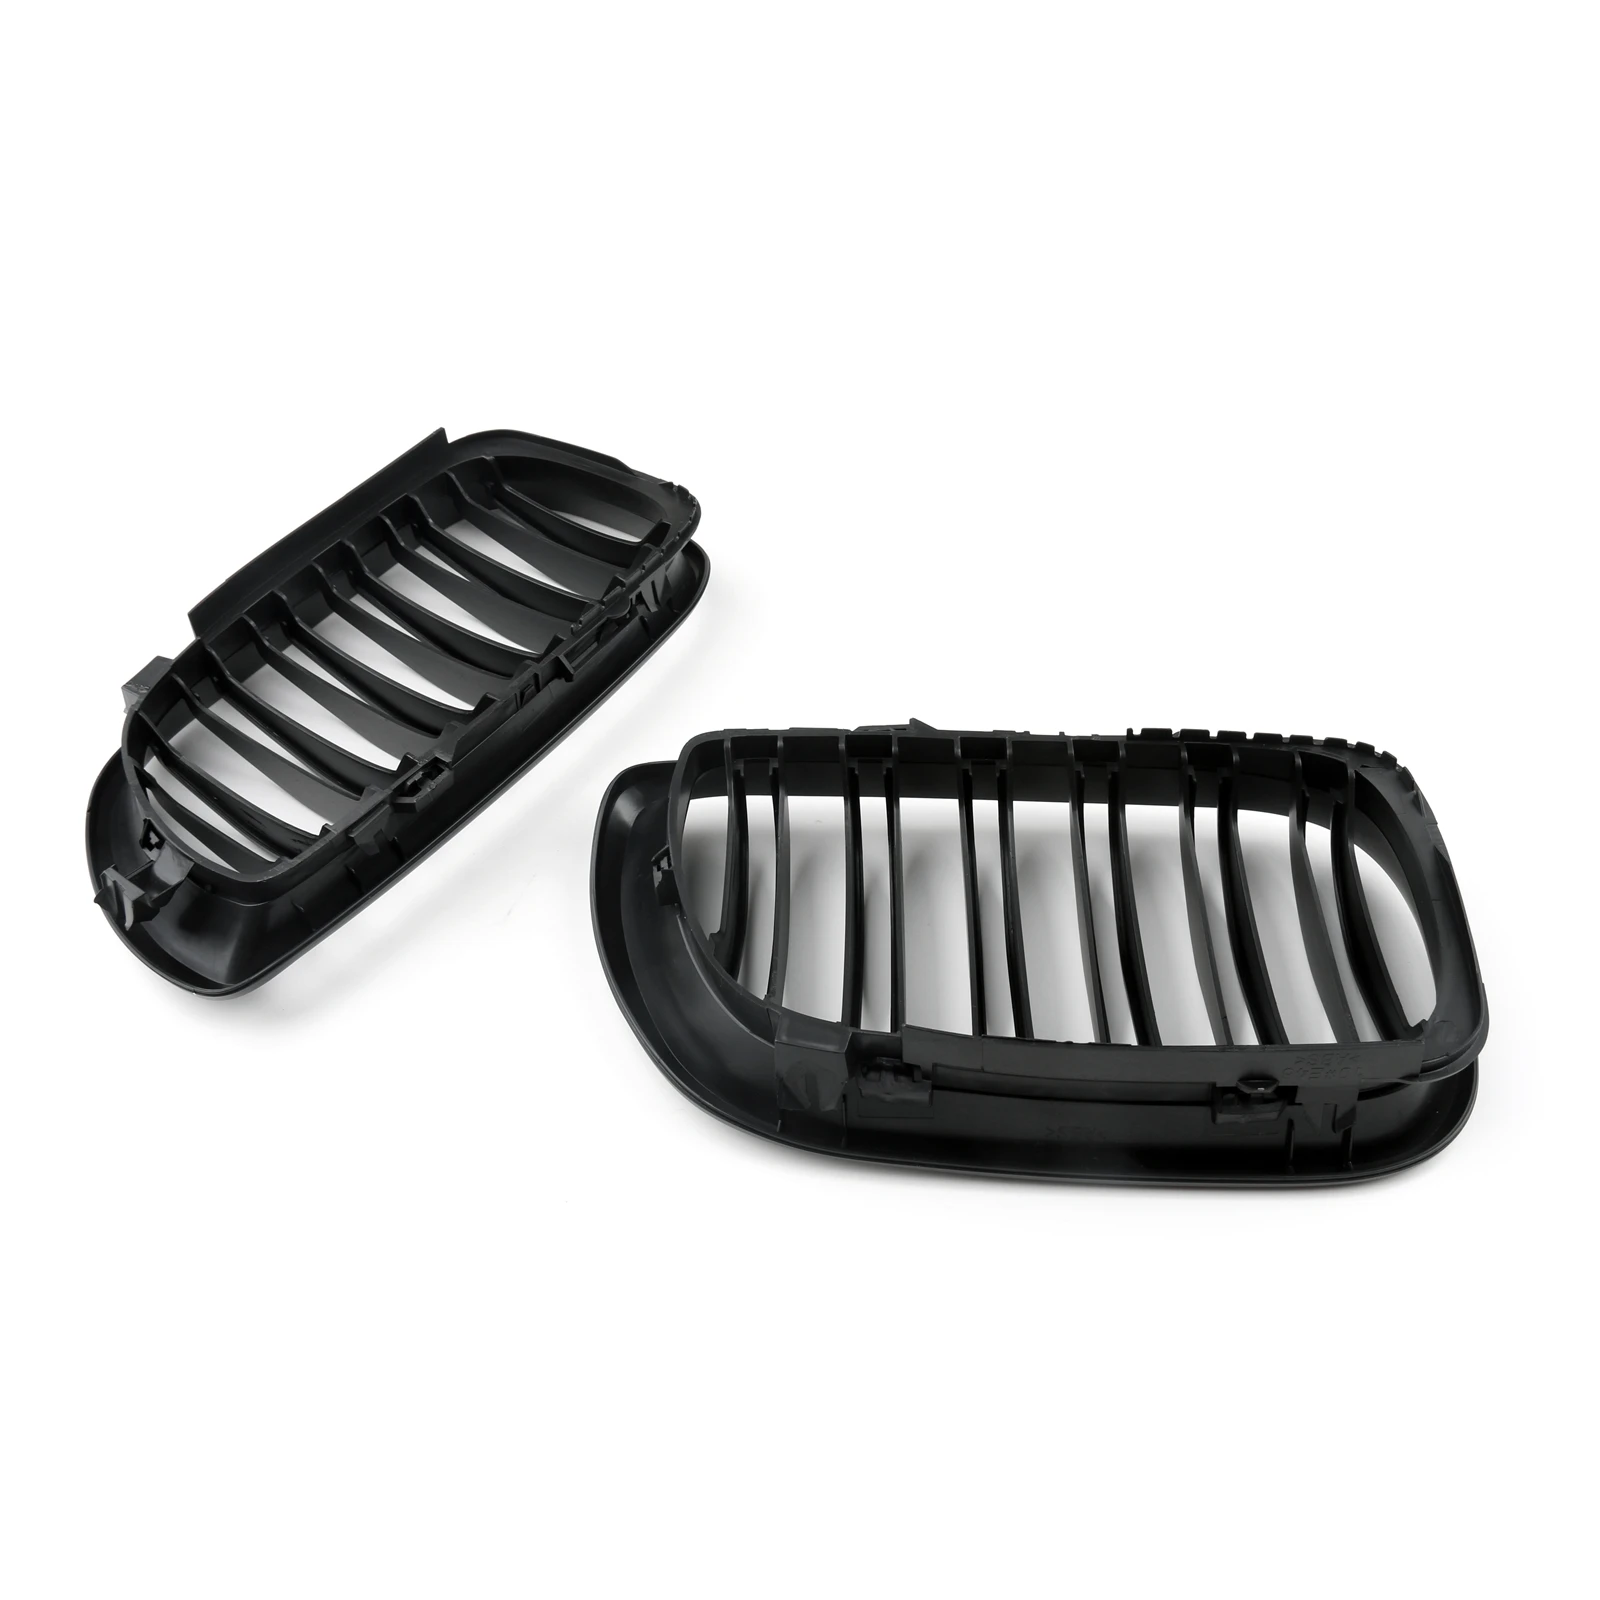 

Areyourshop Matte Black Front Kidney Grille Double Rib For BMW E46 3 Series 4 Door 2002 2003 2004 2005, Same as picture show